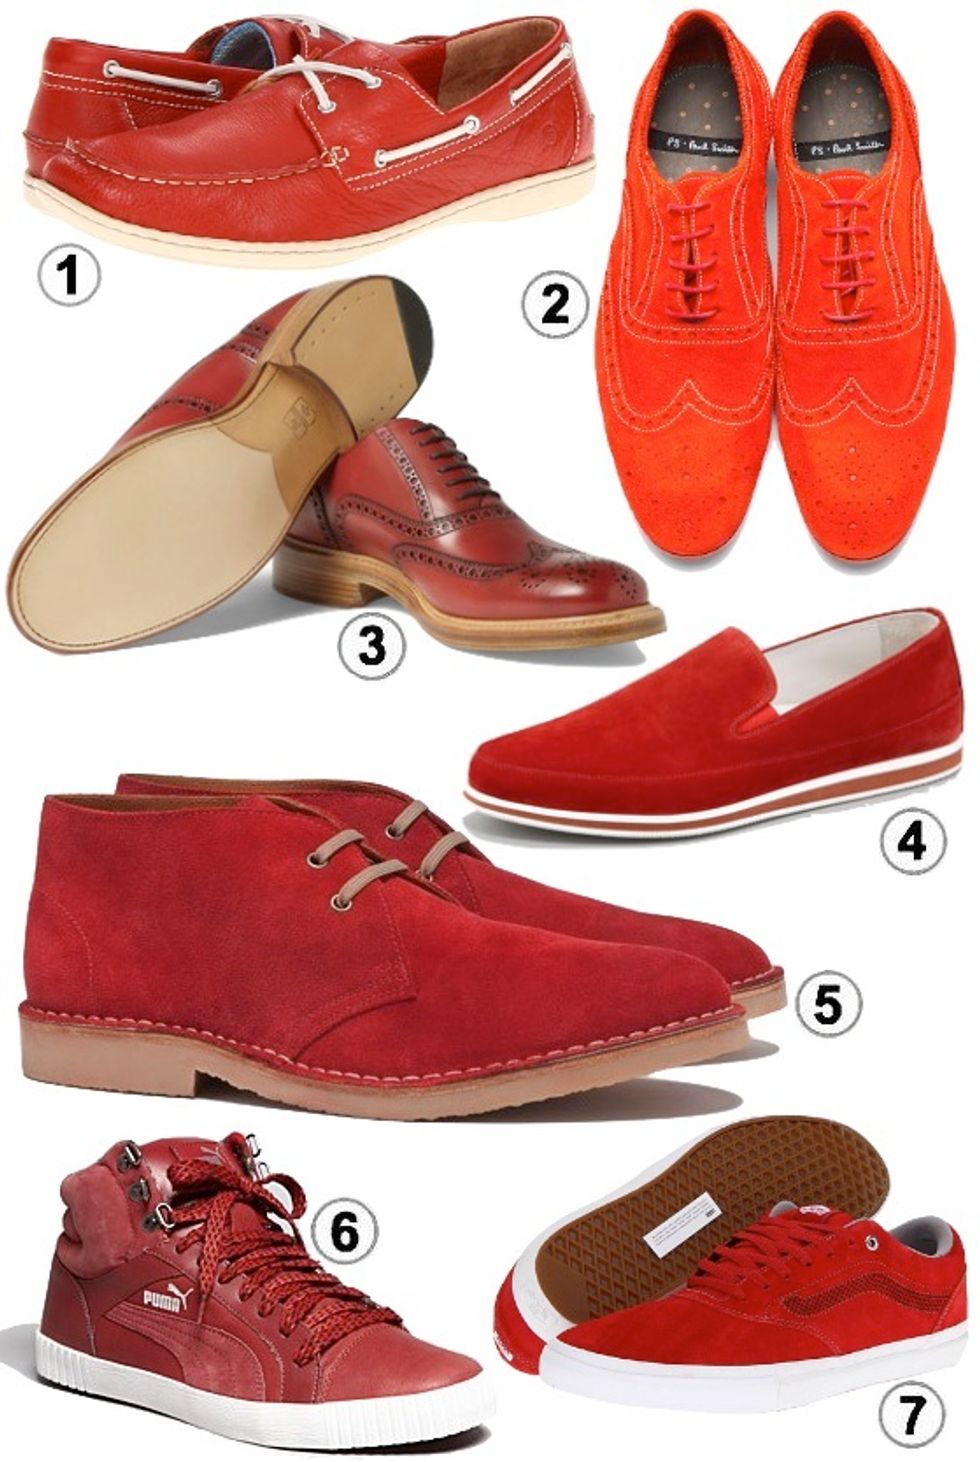 Look of the Week: Men's Spring Shoes in 50 Shades of Red